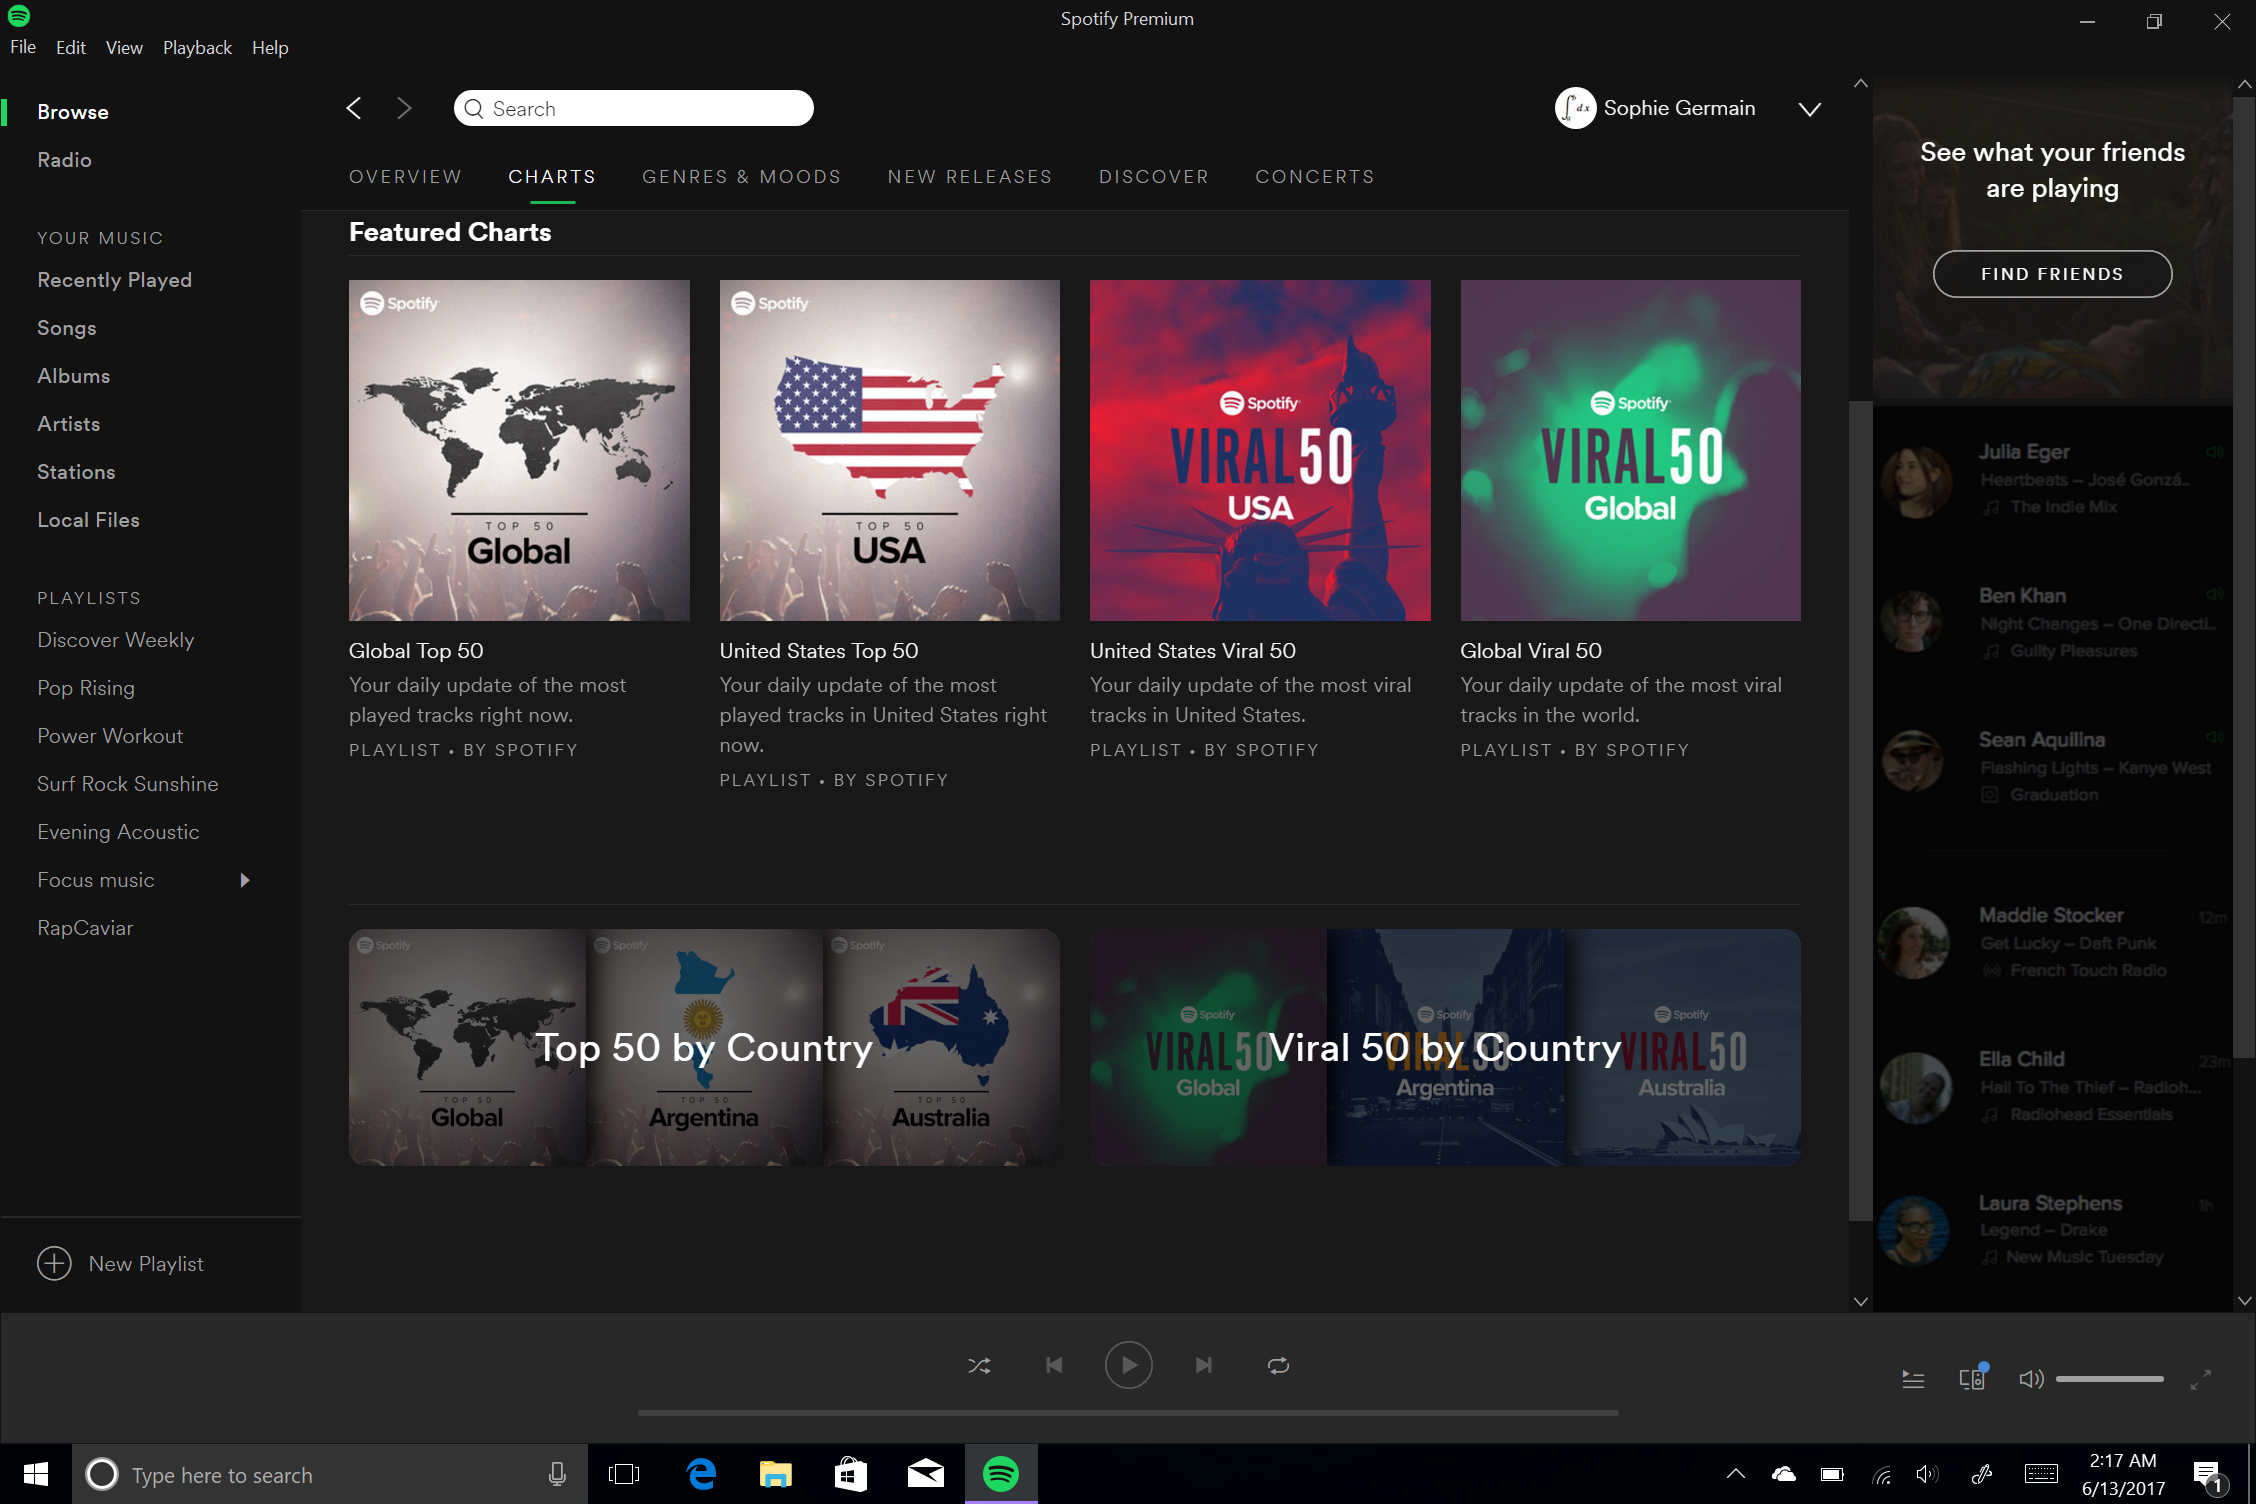 forticlient windows 10 app